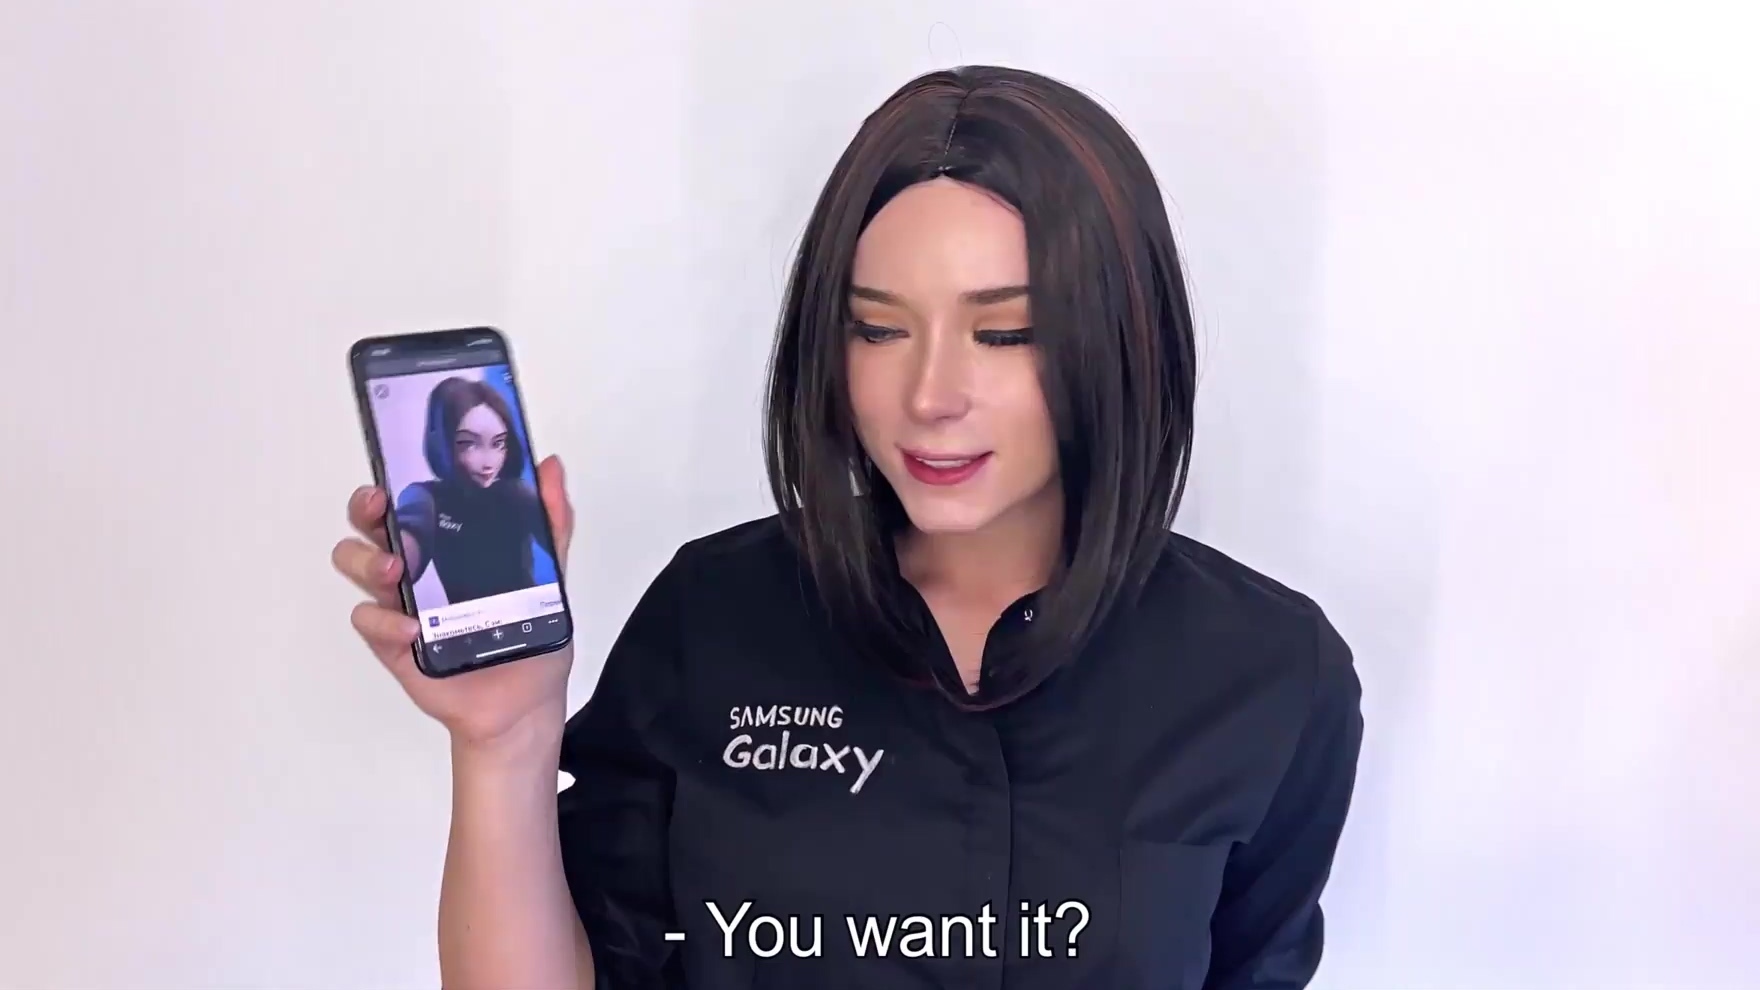 Samsung Sam is gonna suck your rod for iPhone - amateur POV